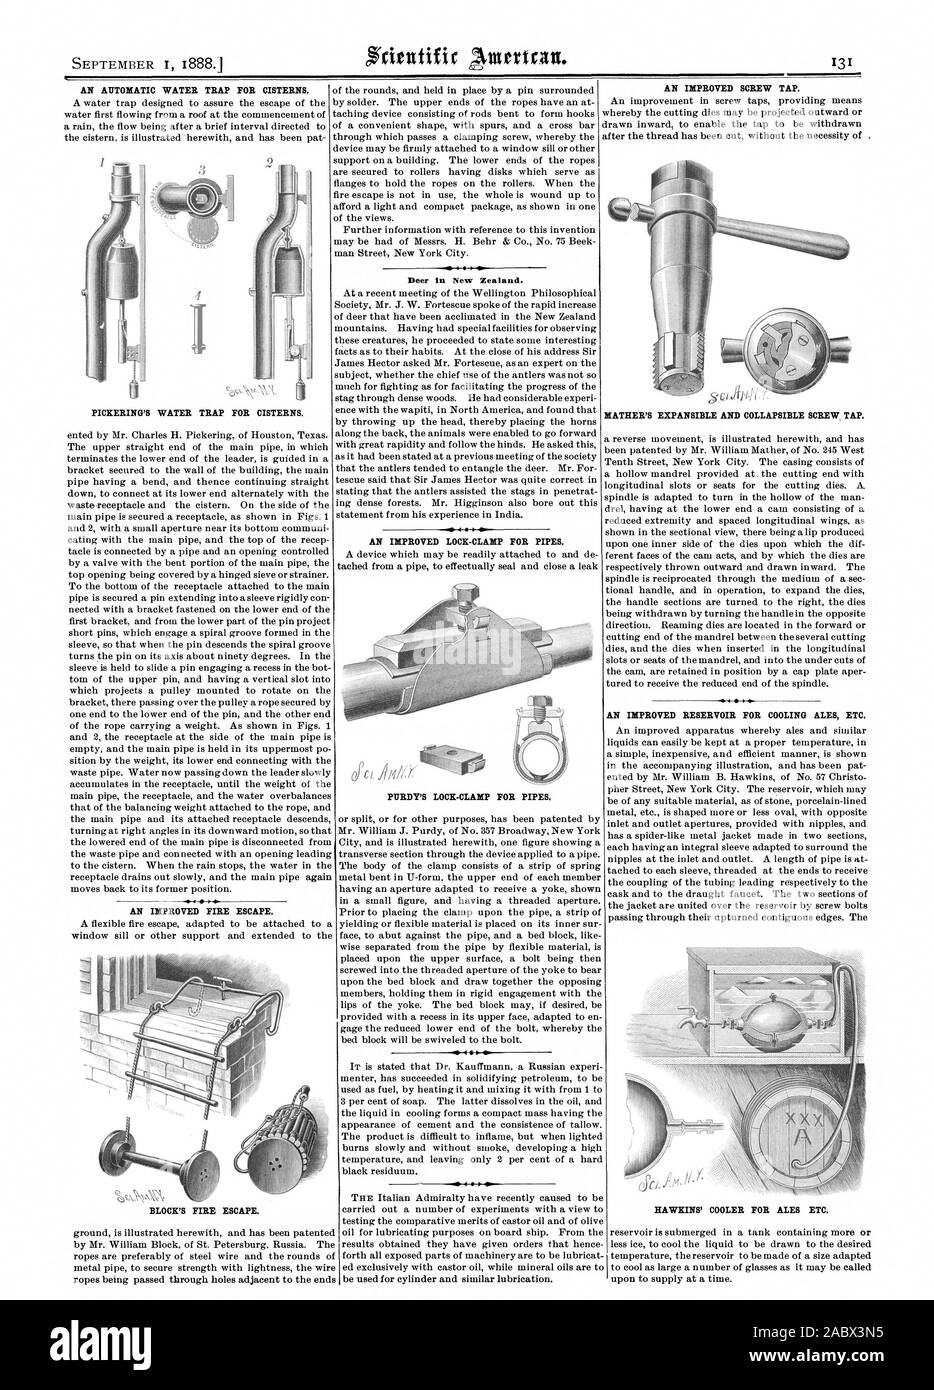 AN AUTOMATIC WATER TRAP FOR CISTERNS. PICKERING'S WATER TRAP FOR CISTERNS. AN IMPROVED FIRE ESCAPE. BLOCK'S FIRE ESCAPE. AN IMPROVED SCREW TAP. Deer in New Zealand. PURDY'S LOCK-CLAMP FOR PIPES. MATHER'S EXPANSIBLE AND COLLAPSIBLE SCREW TAP. AN IMPROVED RESERVOIR FOR COOLING ALES ETC. HAWKINS' COOLER FOR ALES ETC., scientific american, 1888-09-01 Stock Photo